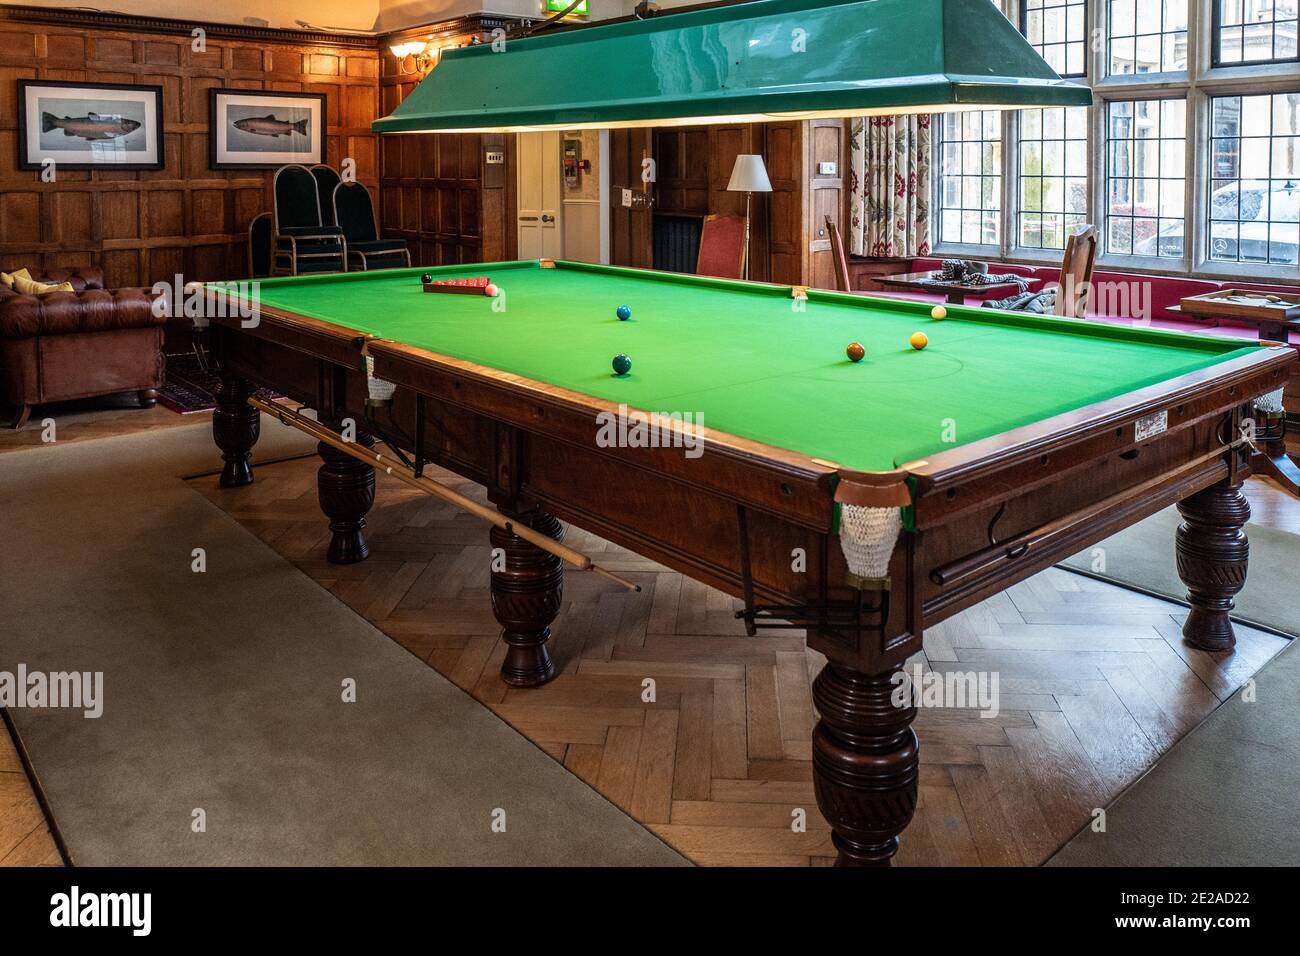 Vintage Snooker Table High Resolution Stock Photography and Images - Alamy